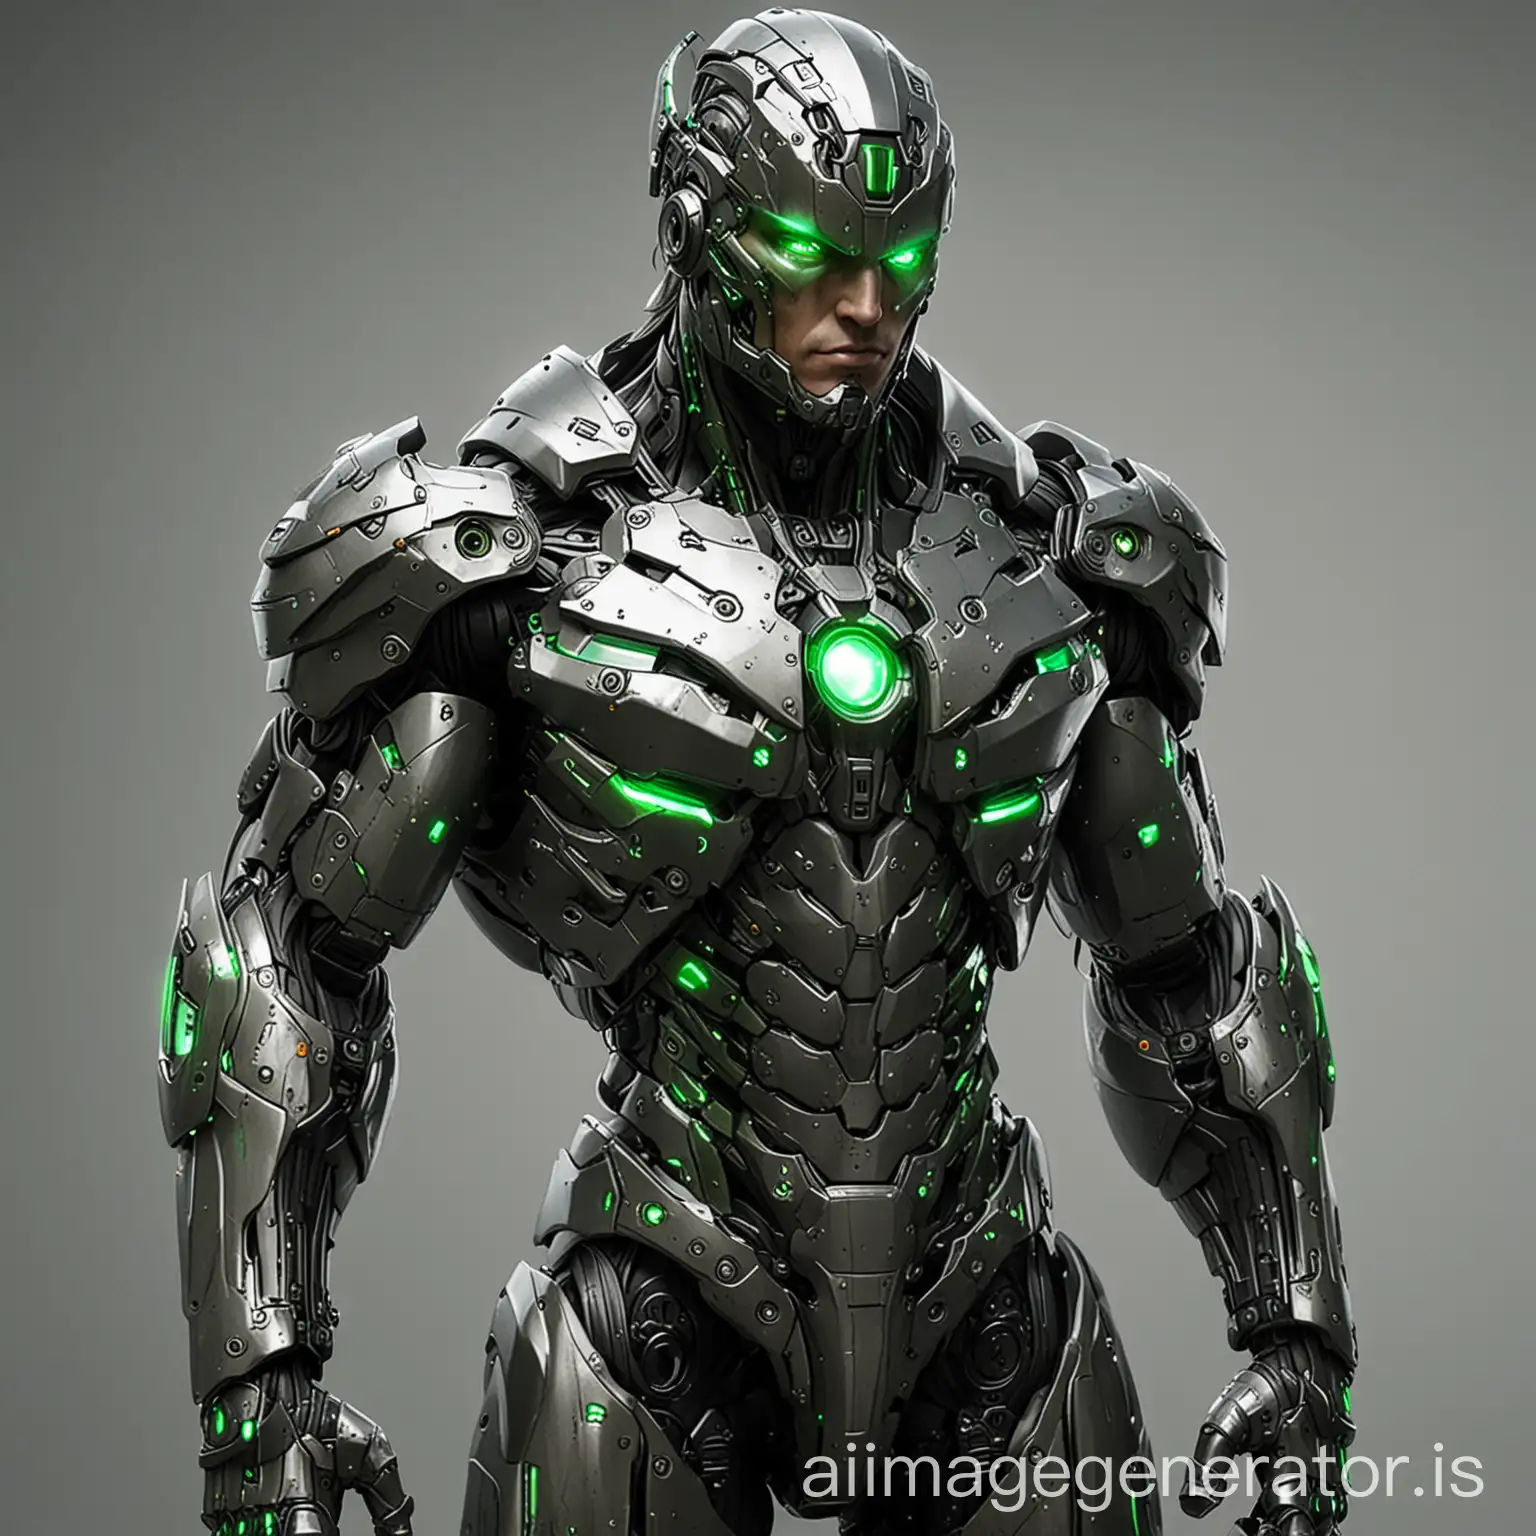 tall, muscular hi tech armor with glowing green eyes,fore arm bands